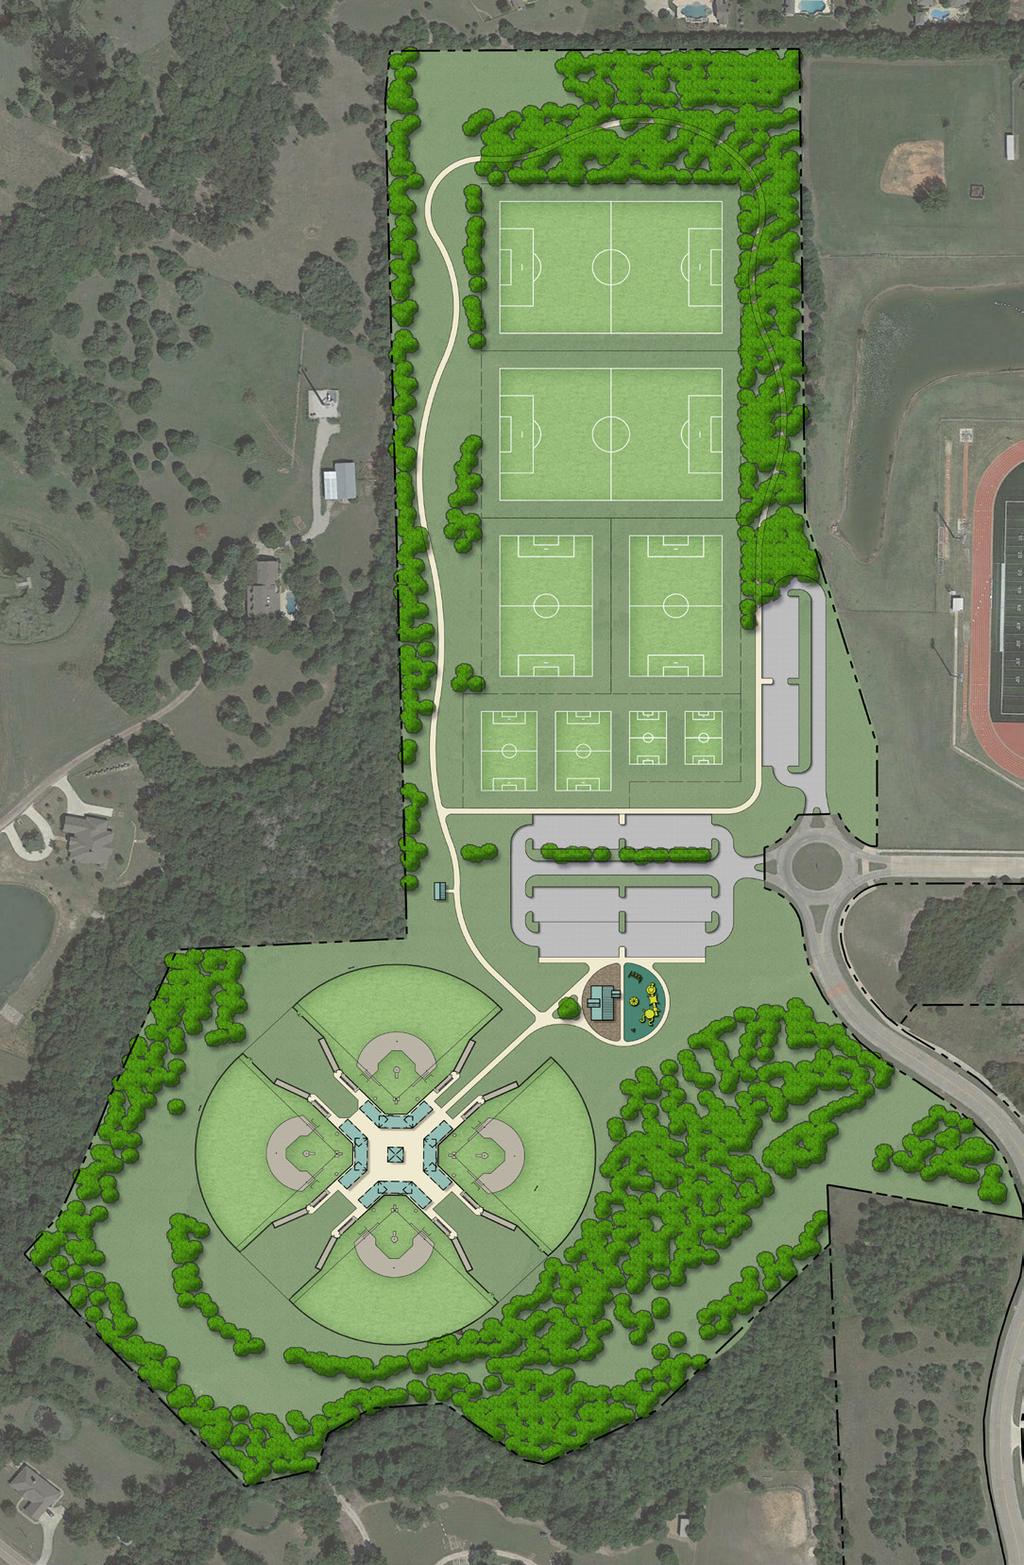 Action: Master plan and design a phased Sports and Events Complex including, but not limited to, the following: Soccer, baseball, and softball fields Trails Splash pad Outdoor swimming pool